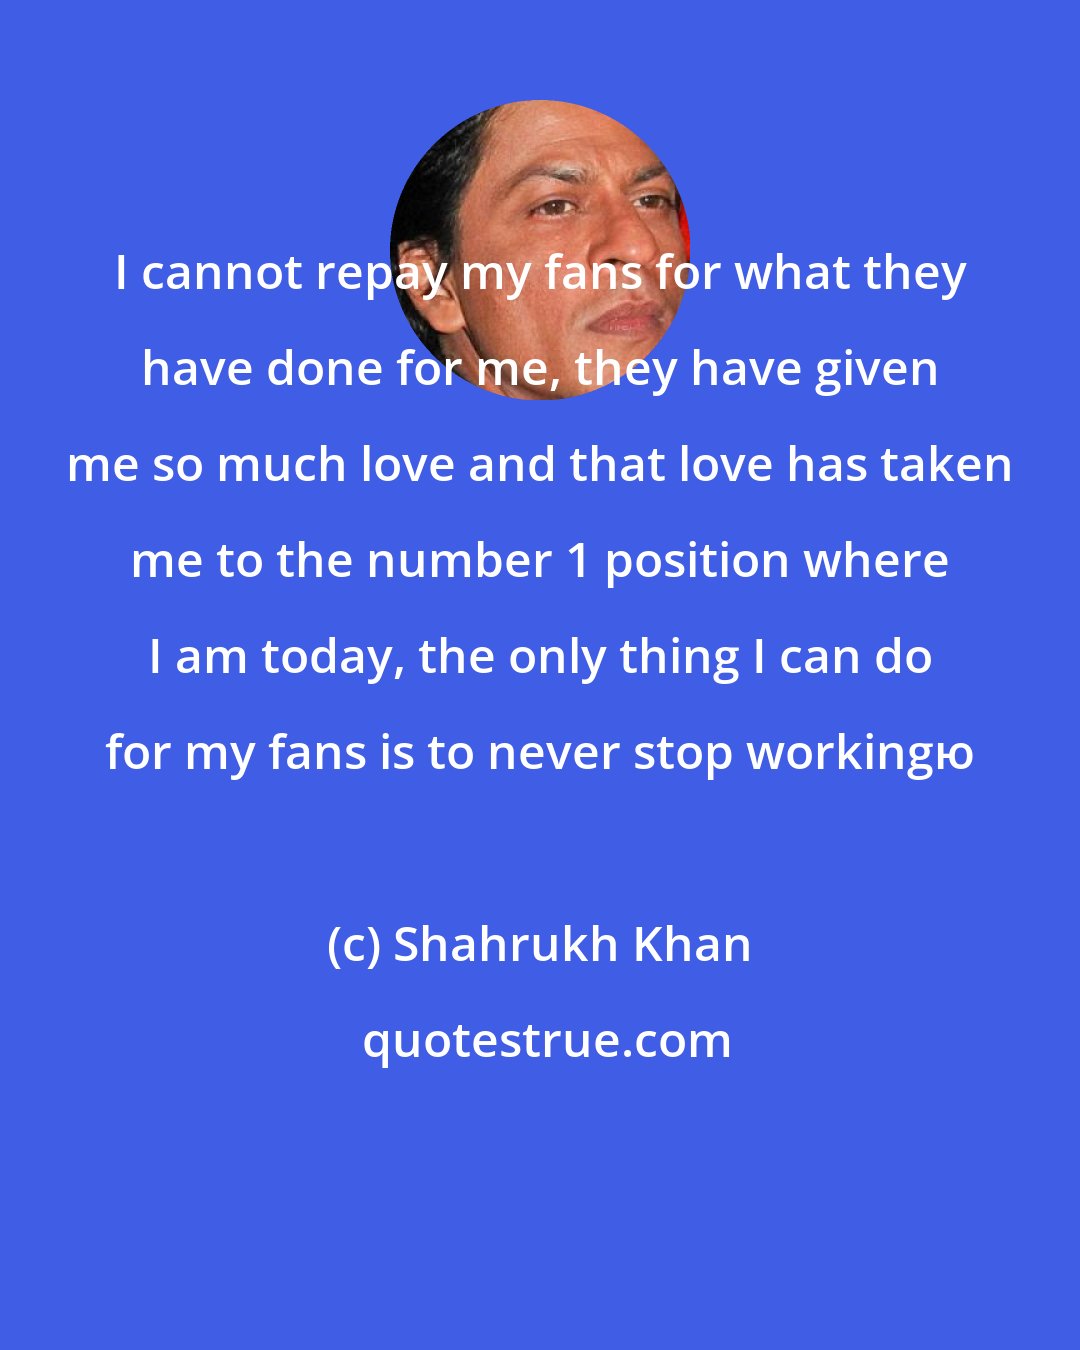 Shahrukh Khan: I cannot repay my fans for what they have done for me, they have given me so much love and that love has taken me to the number 1 position where I am today, the only thing I can do for my fans is to never stop workingю